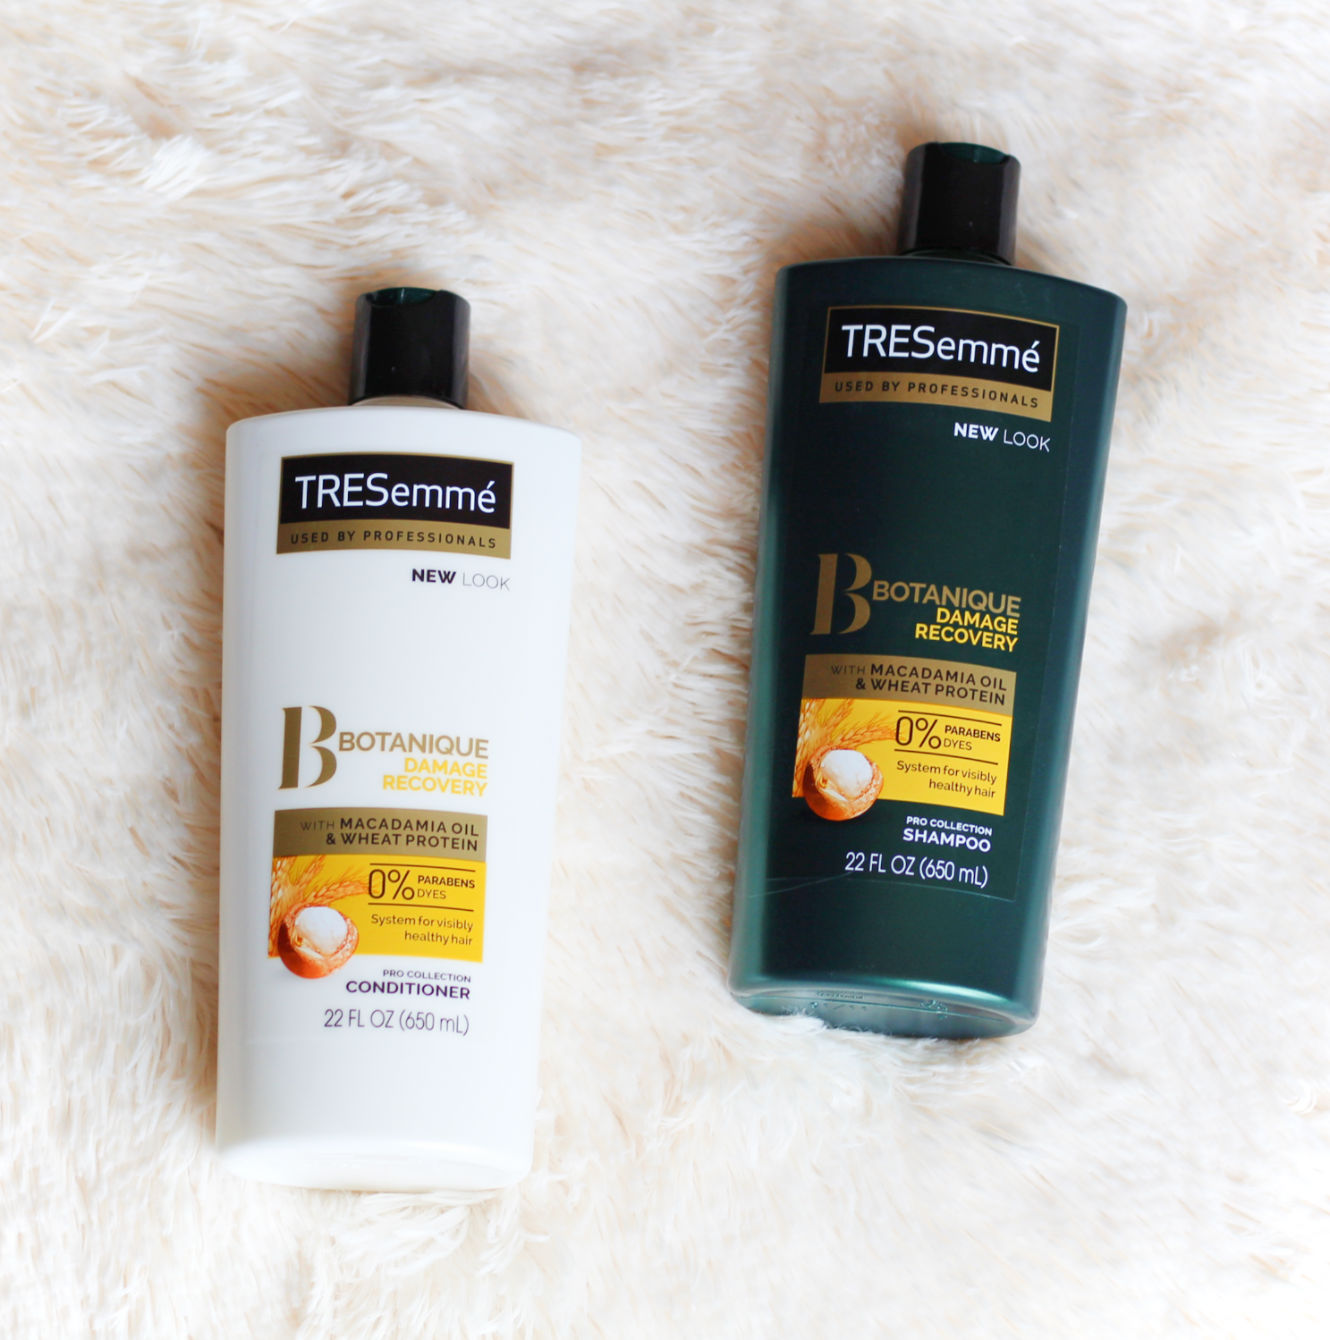 A Good Shampoo And Conditioner #beaaty #hairproducts